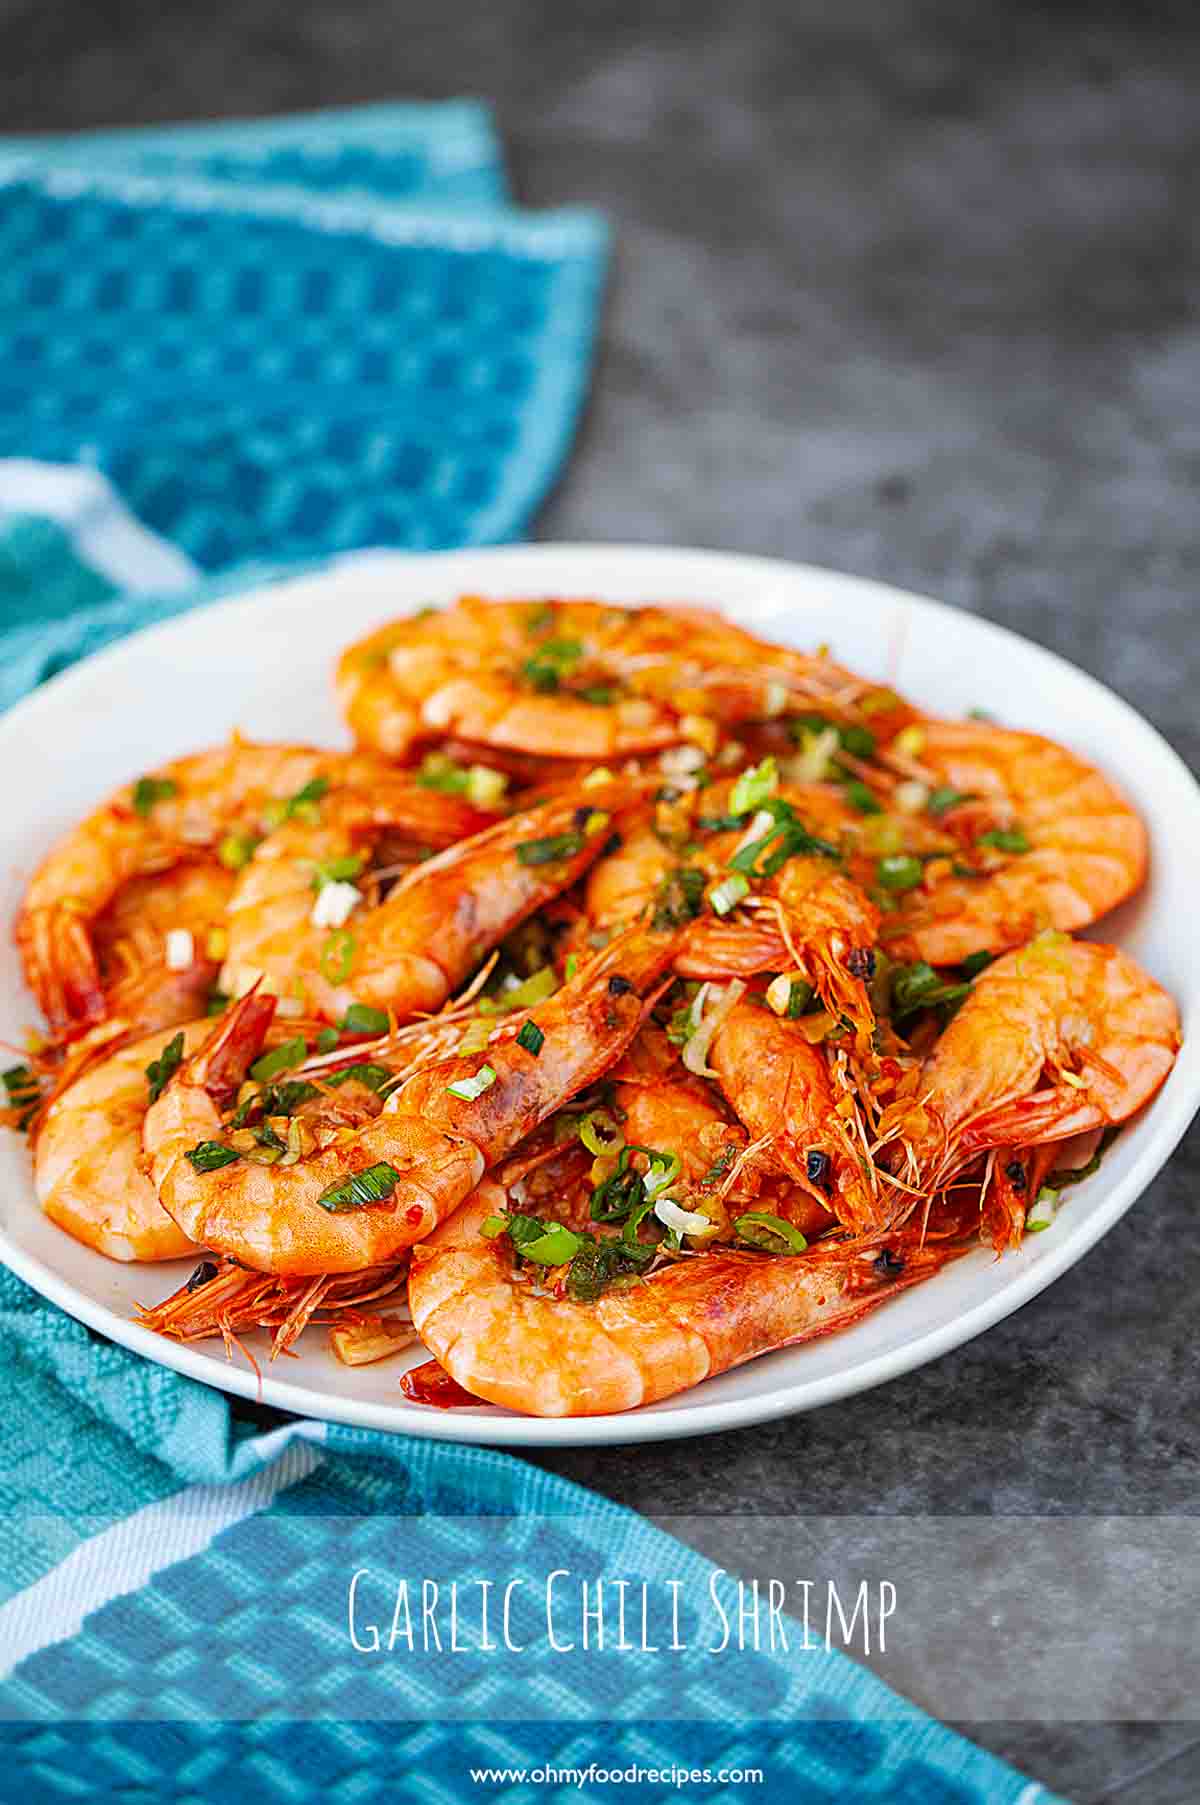 Asian style chili garlic shrimp on an oval white plate with blue towel.
